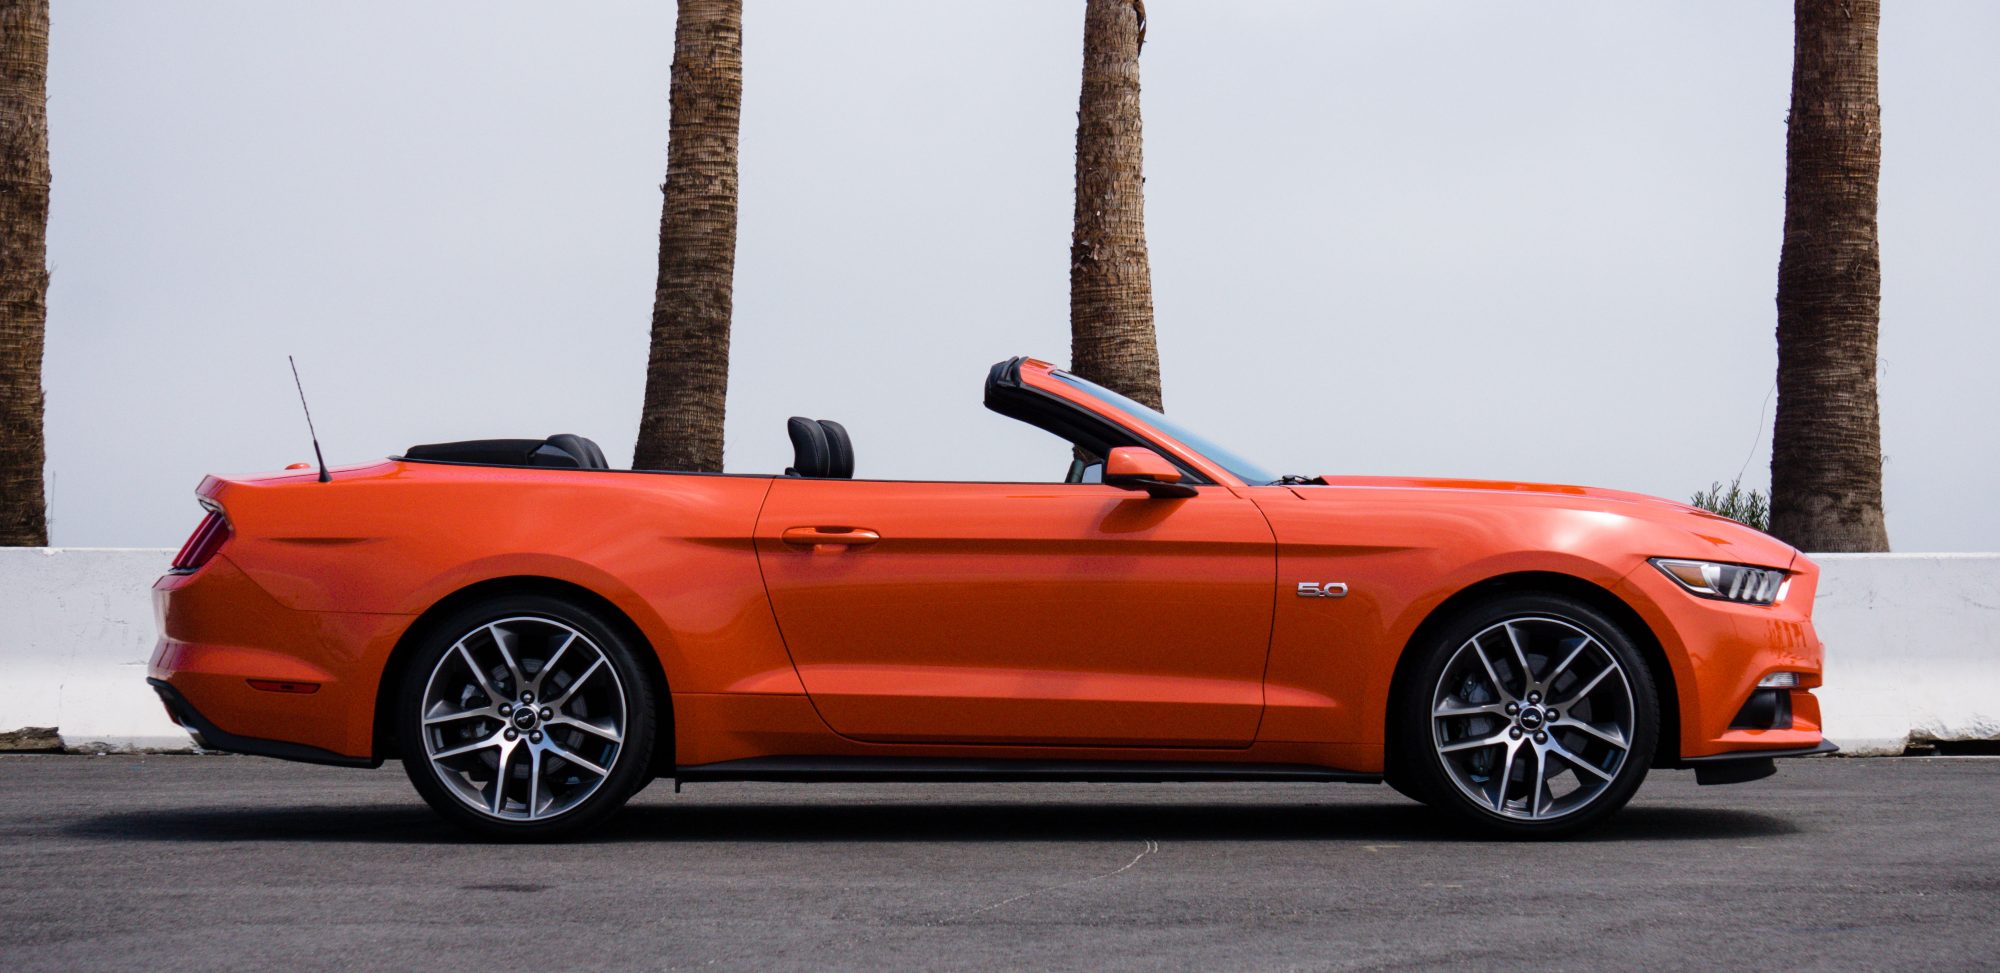 Buying a Convertible Car: Should You Worry About the Roof? - Autotrader